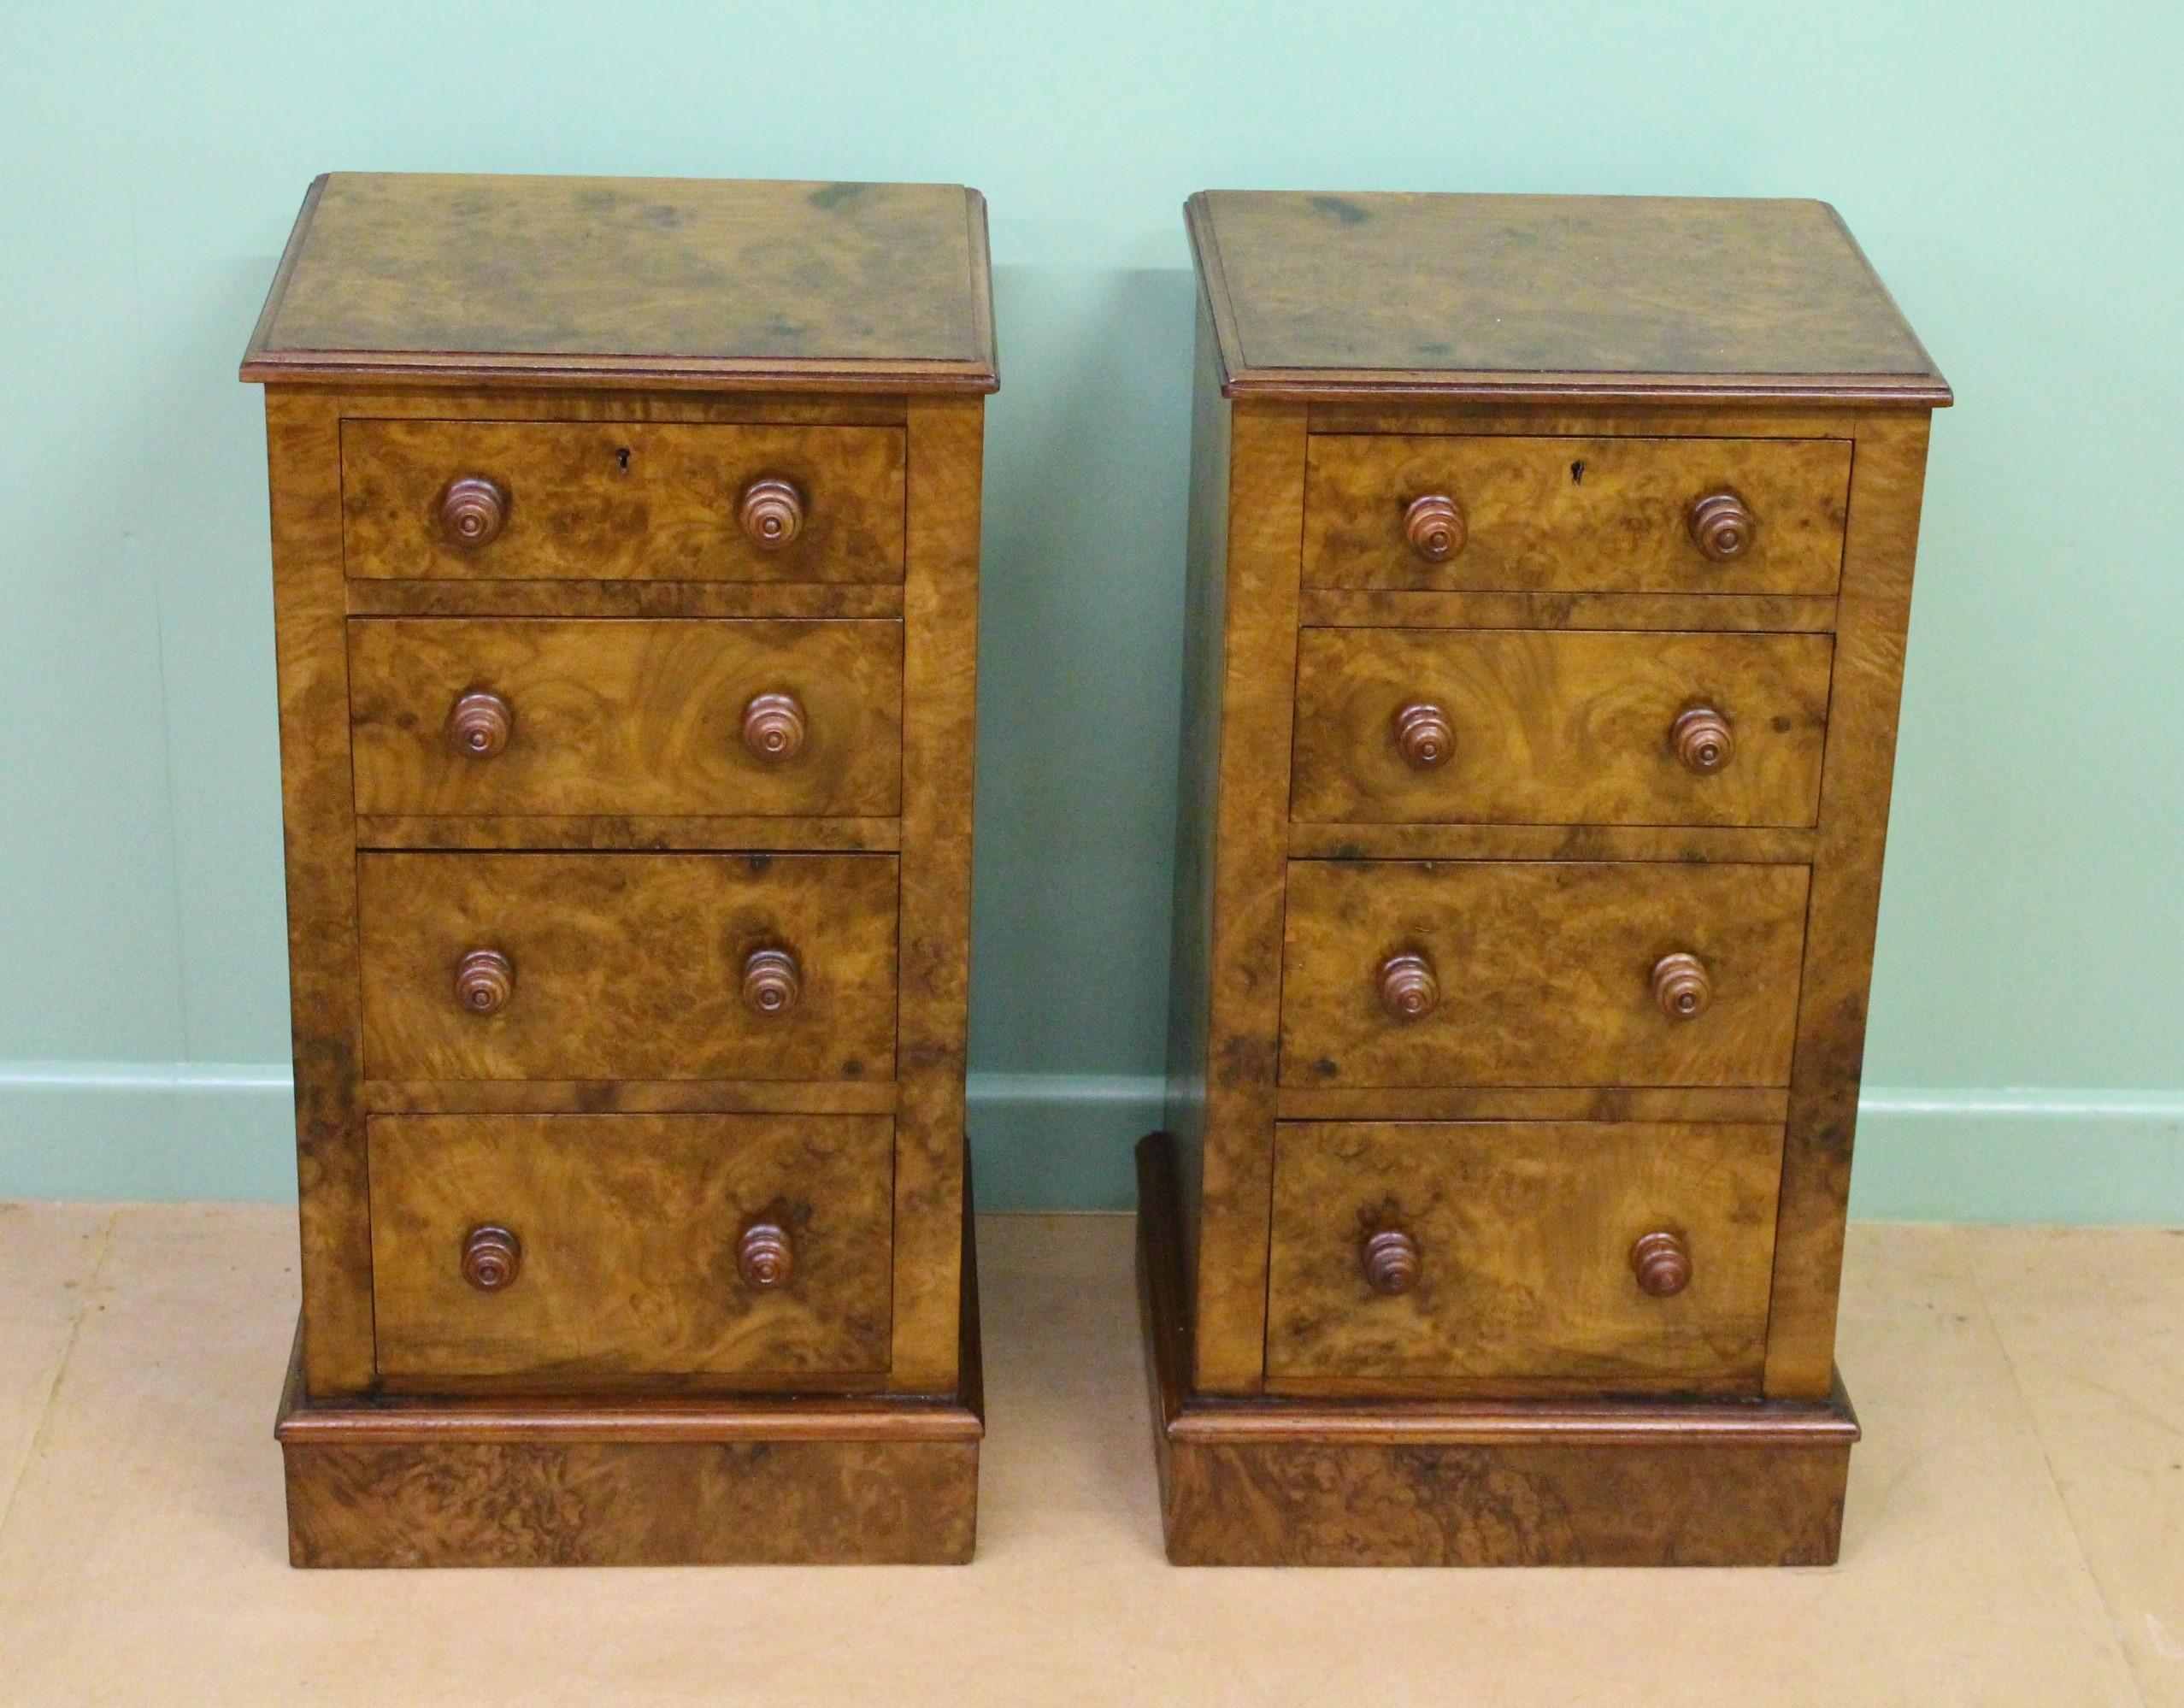 A very good pair of Victorian burr walnut bedside chests of drawers. Well-constructed in solid walnut with attractive burr walnut veneers. Each with a series of 4 graduated drawers, fitted with their original solid walnut bun handles.